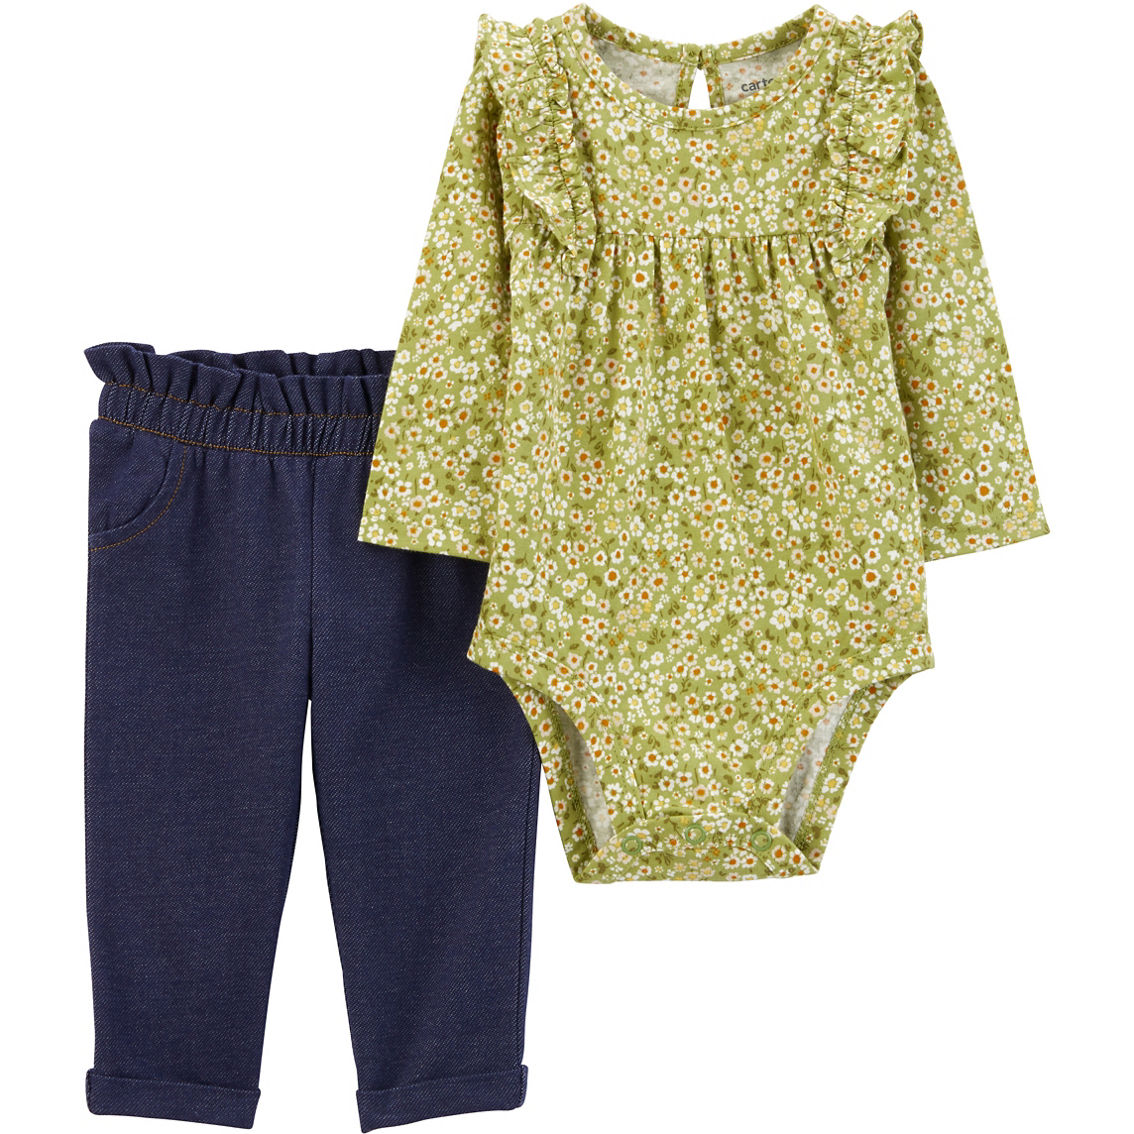 Carter's Baby Girls Floral Bodysuit and Pants 2 pc. Set